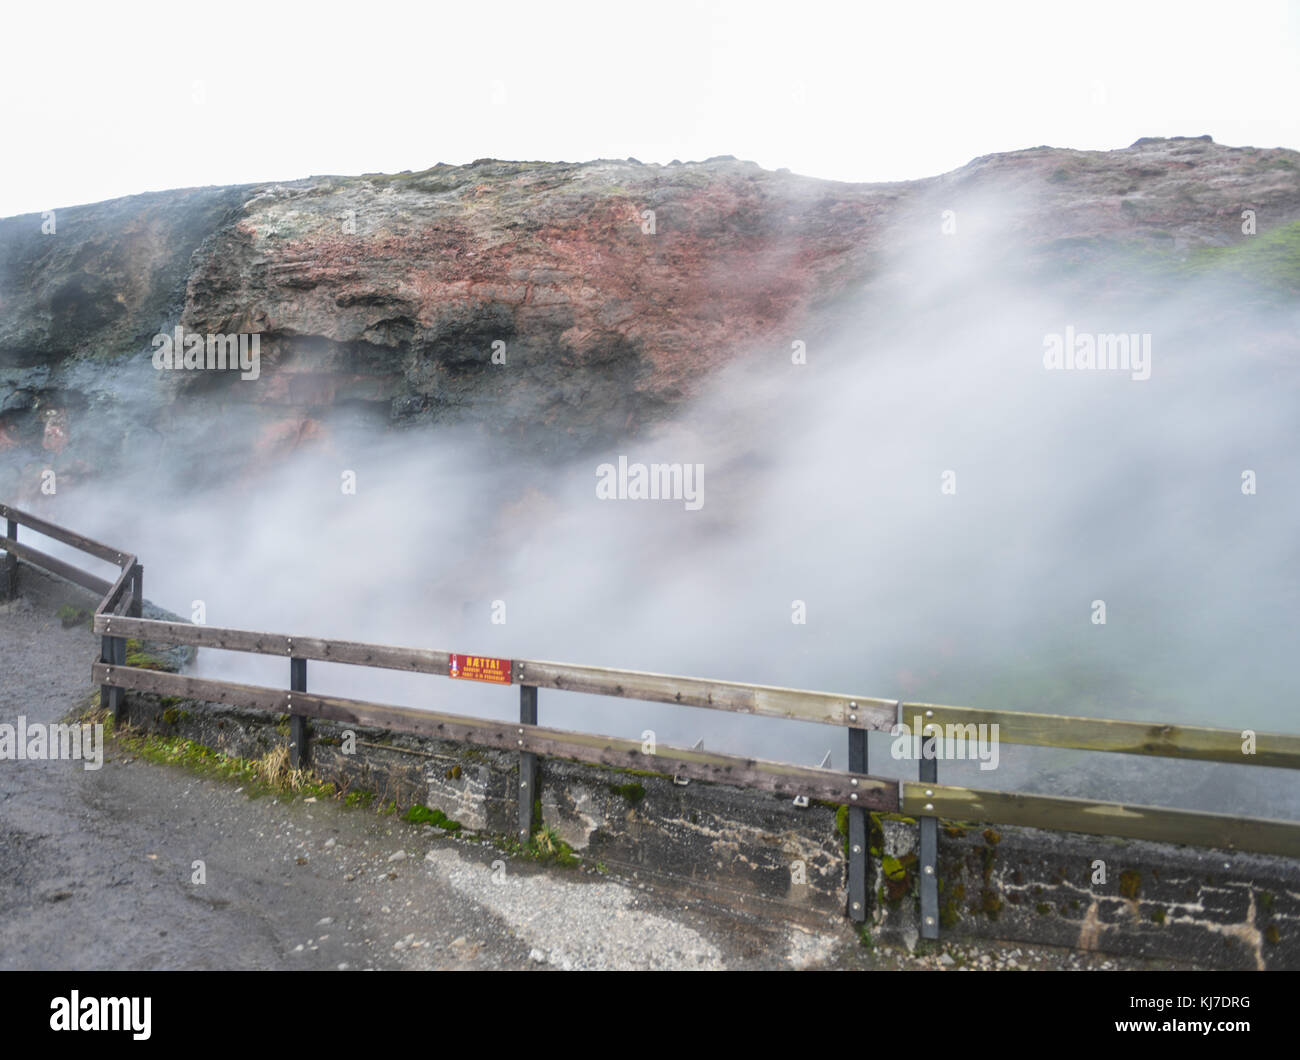 Deildartunguhver, a geothermal hotspring in Reykholtsdalur, Iceland. It has a very high flow rate for a hot spring and water emerges at near boiling.  Stock Photo